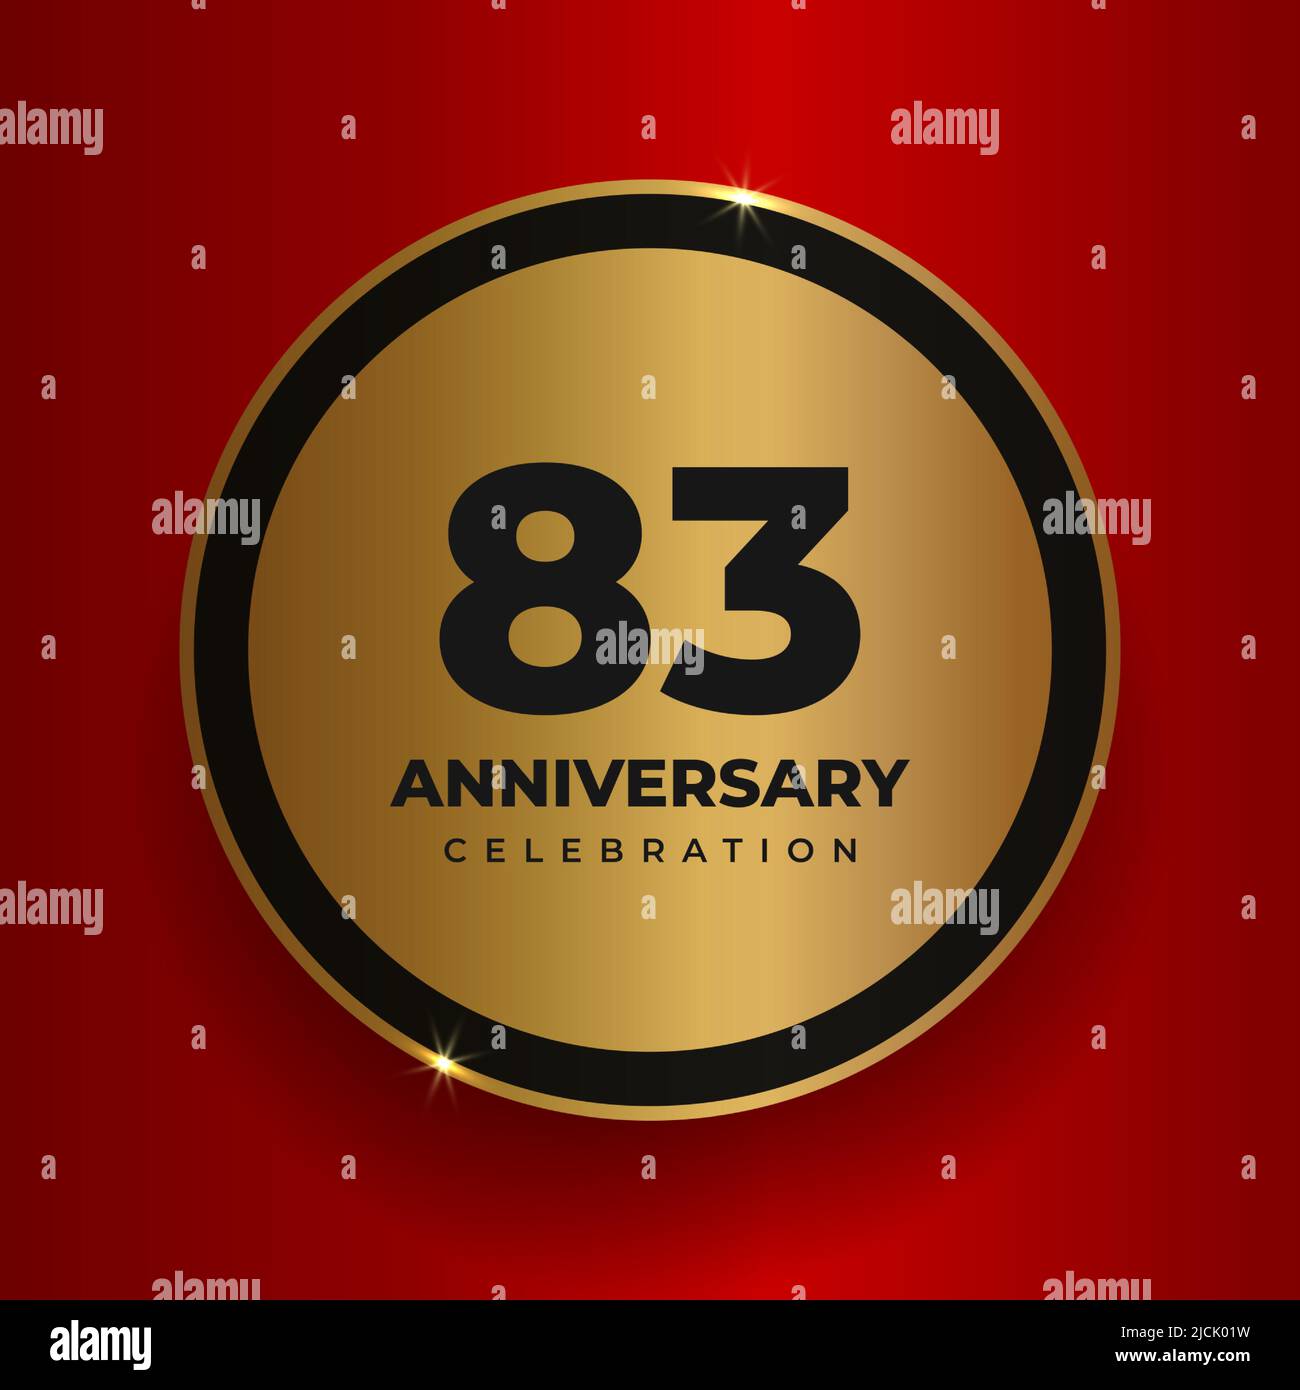 83 years anniversary celebration background. Celebrating 83rd anniversary event party poster template. Vector golden circle with numbers and text on Stock Vector